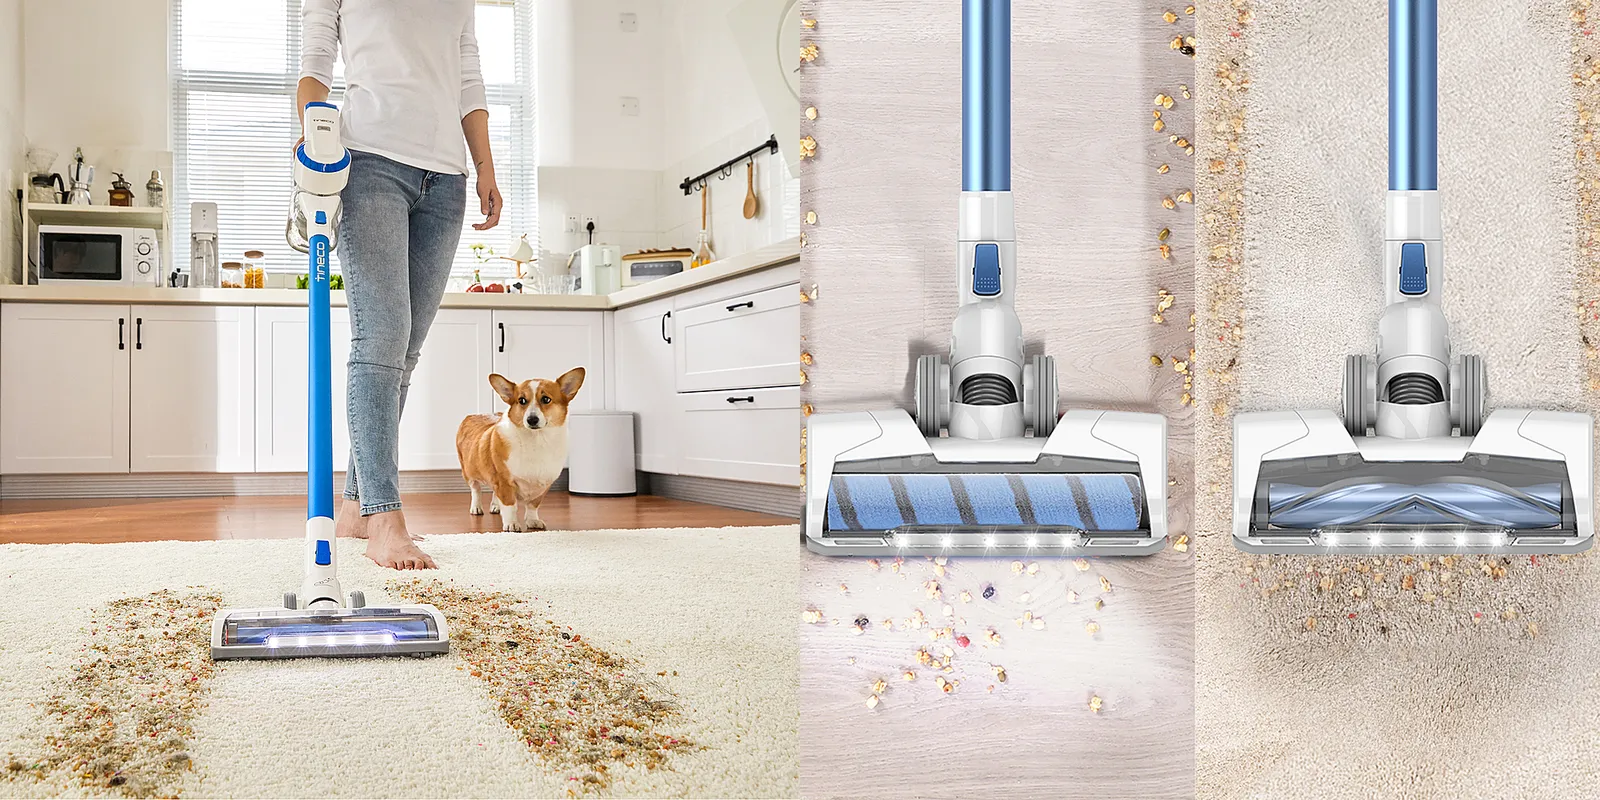 Tineco A10 Tango Cordless Vacuum Cleaner Review: How good is it?